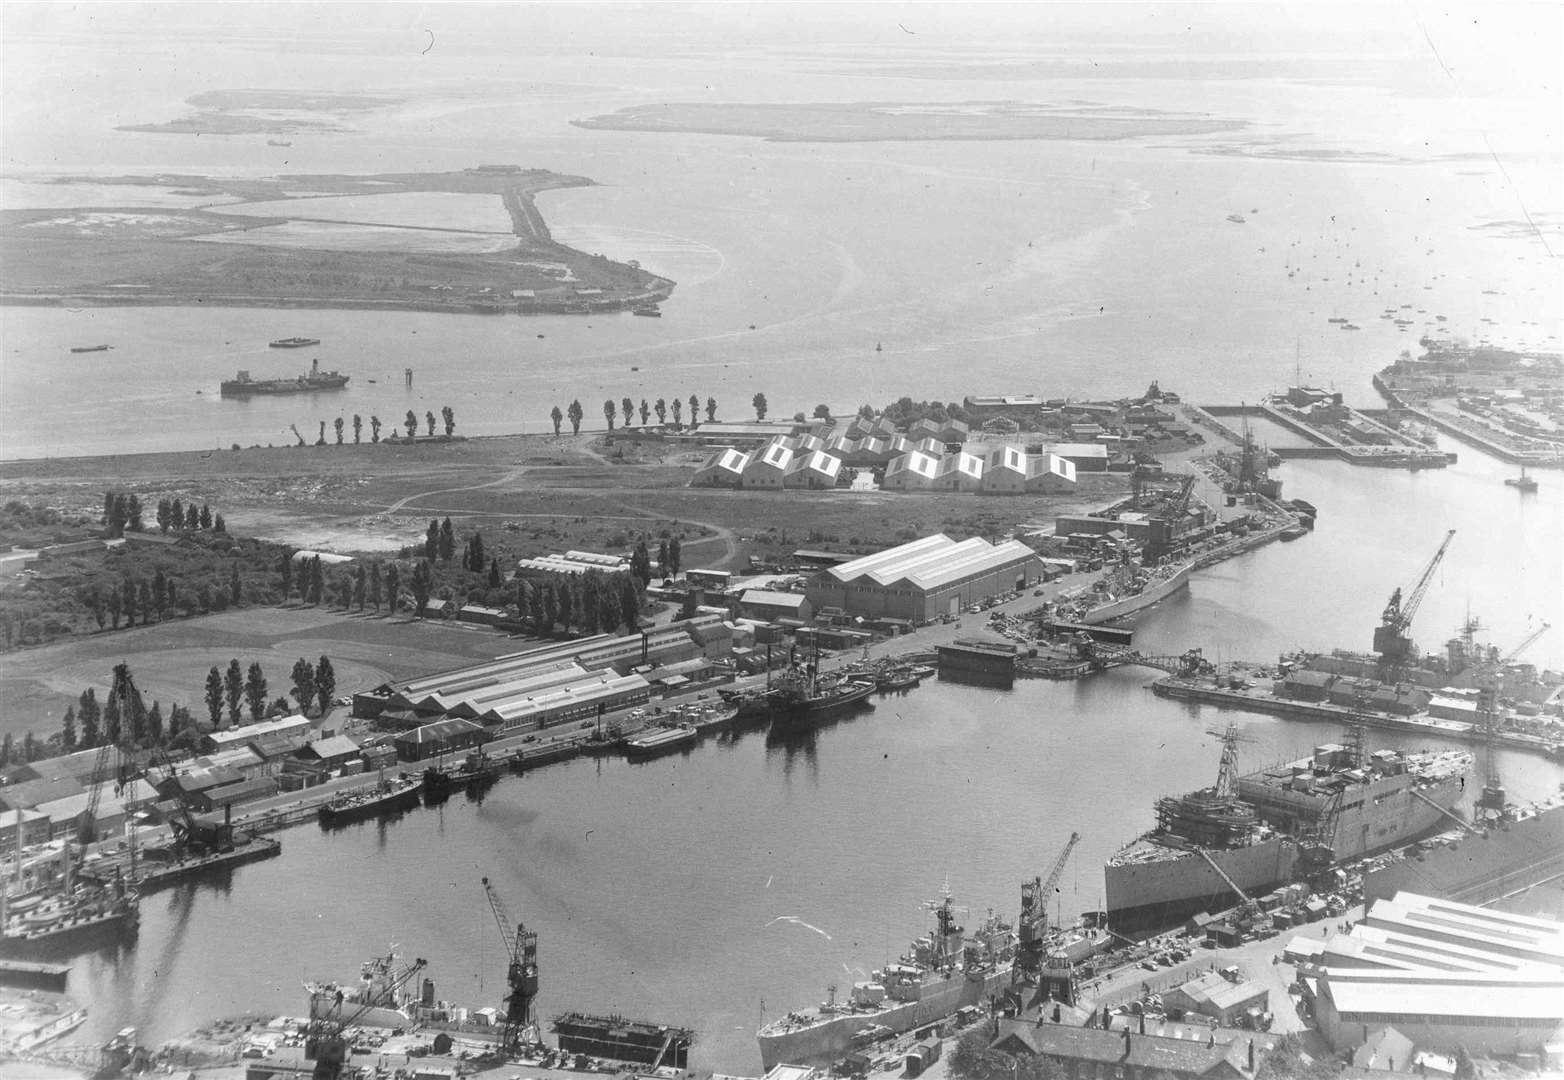 An aerial photo of Chatham Dockyard in the early 1960s